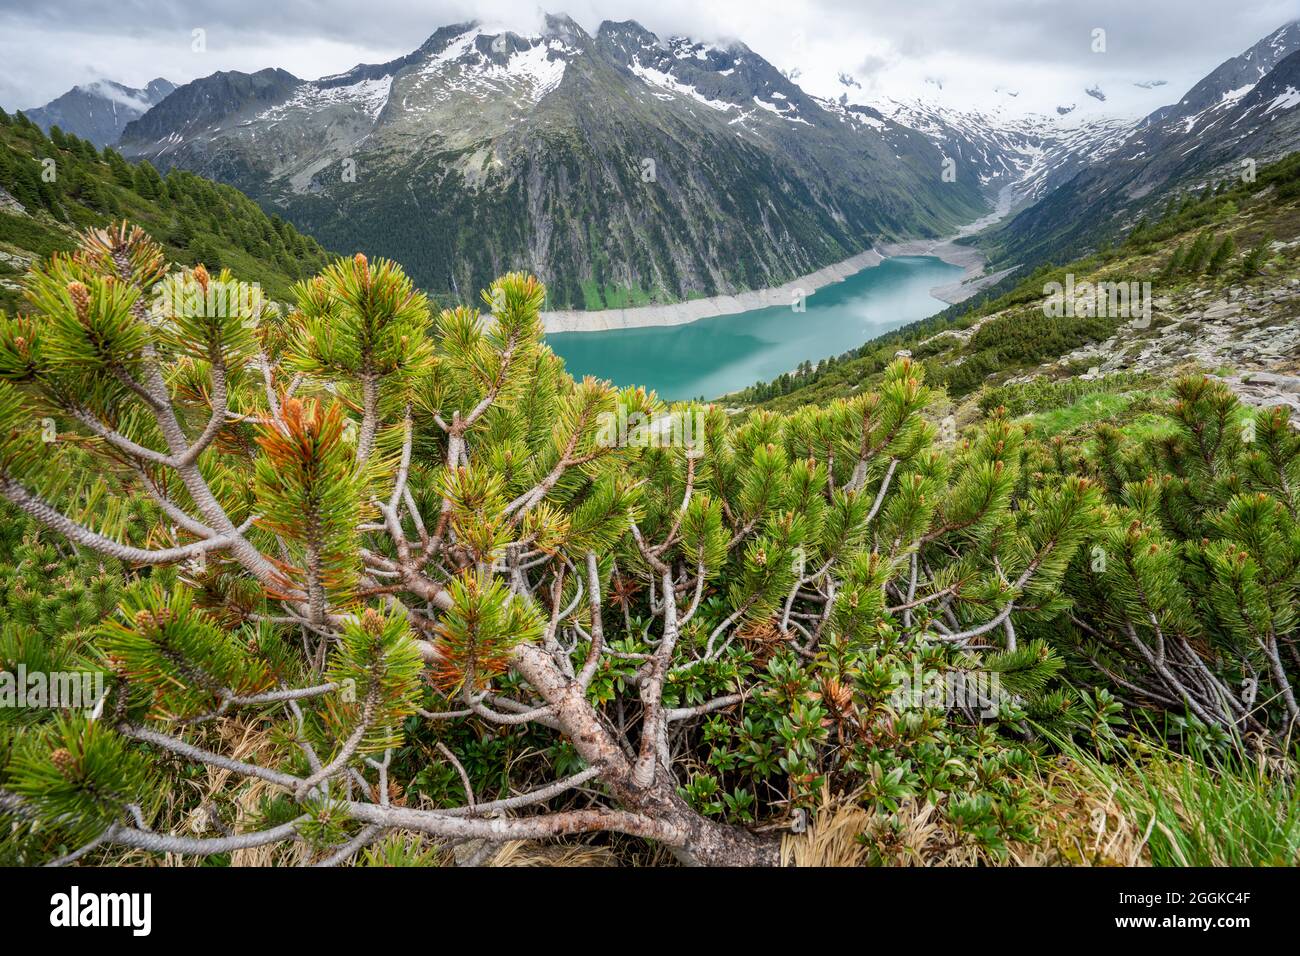 Pine tree trunk, Blue Schlegeis Stausee lake and alps mountains in background. Zillertal, Austria, Europe Stock Photo